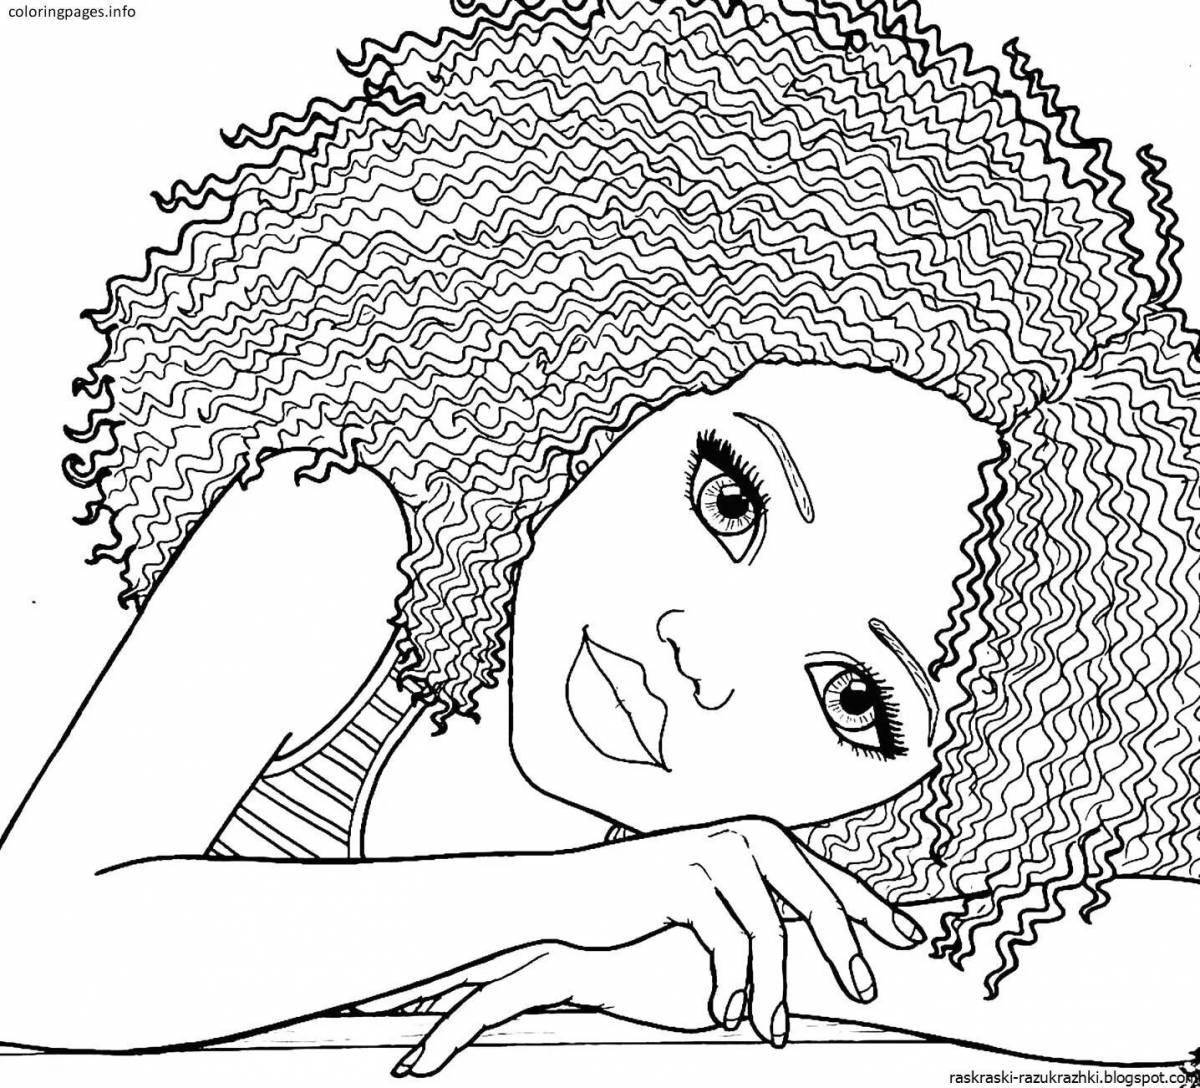 Playful coloring book for girls 10-15 years old